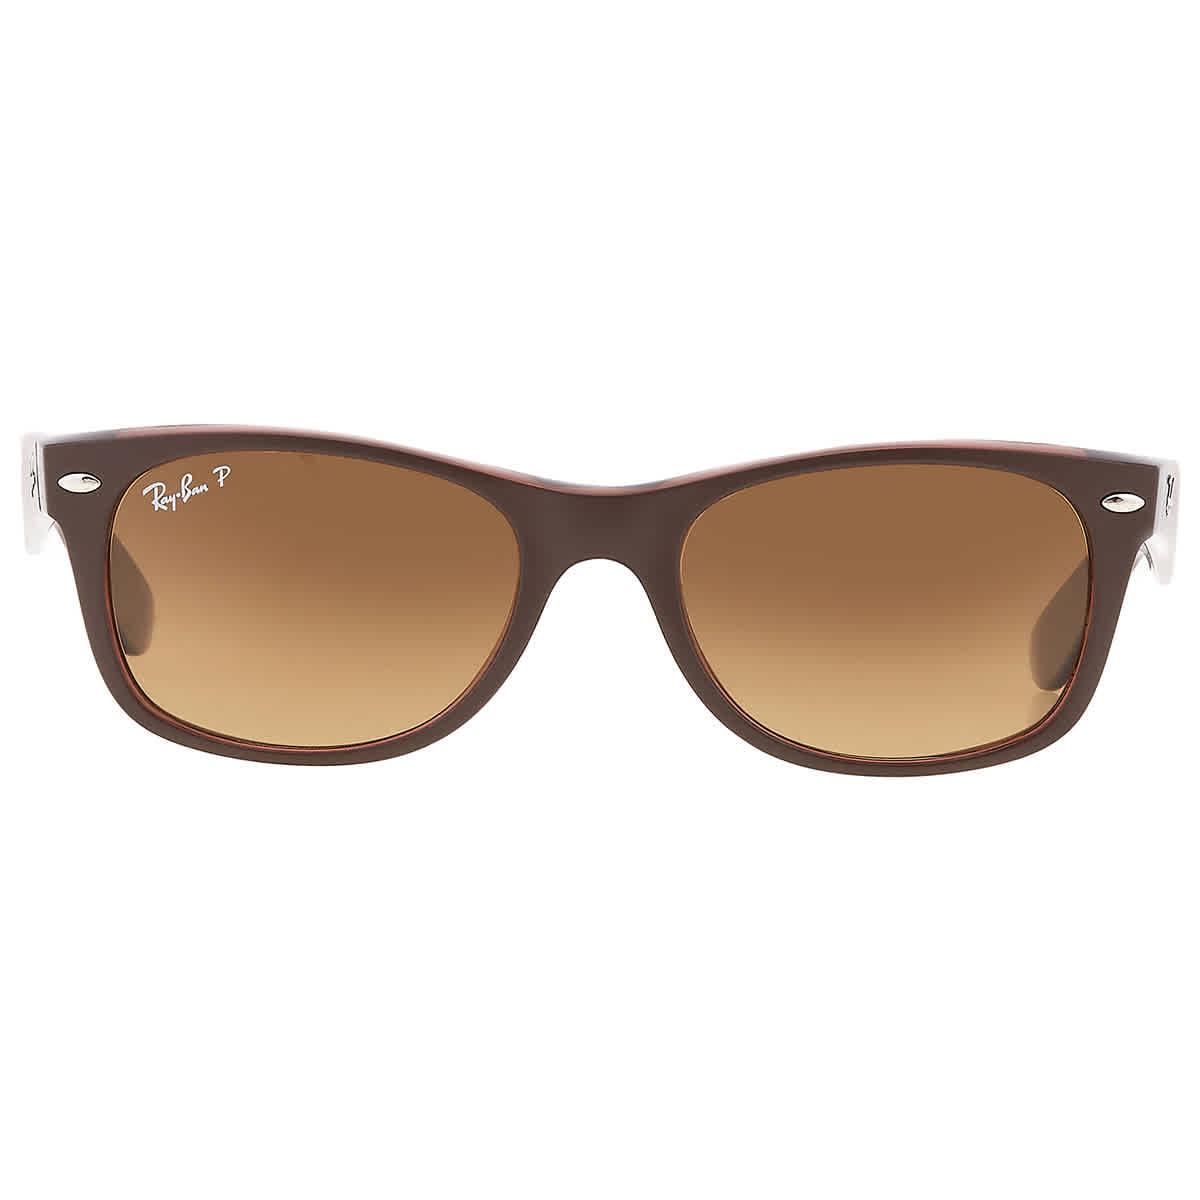 Buy cheap ray bans Online in INDIA at Low Prices at desertcart